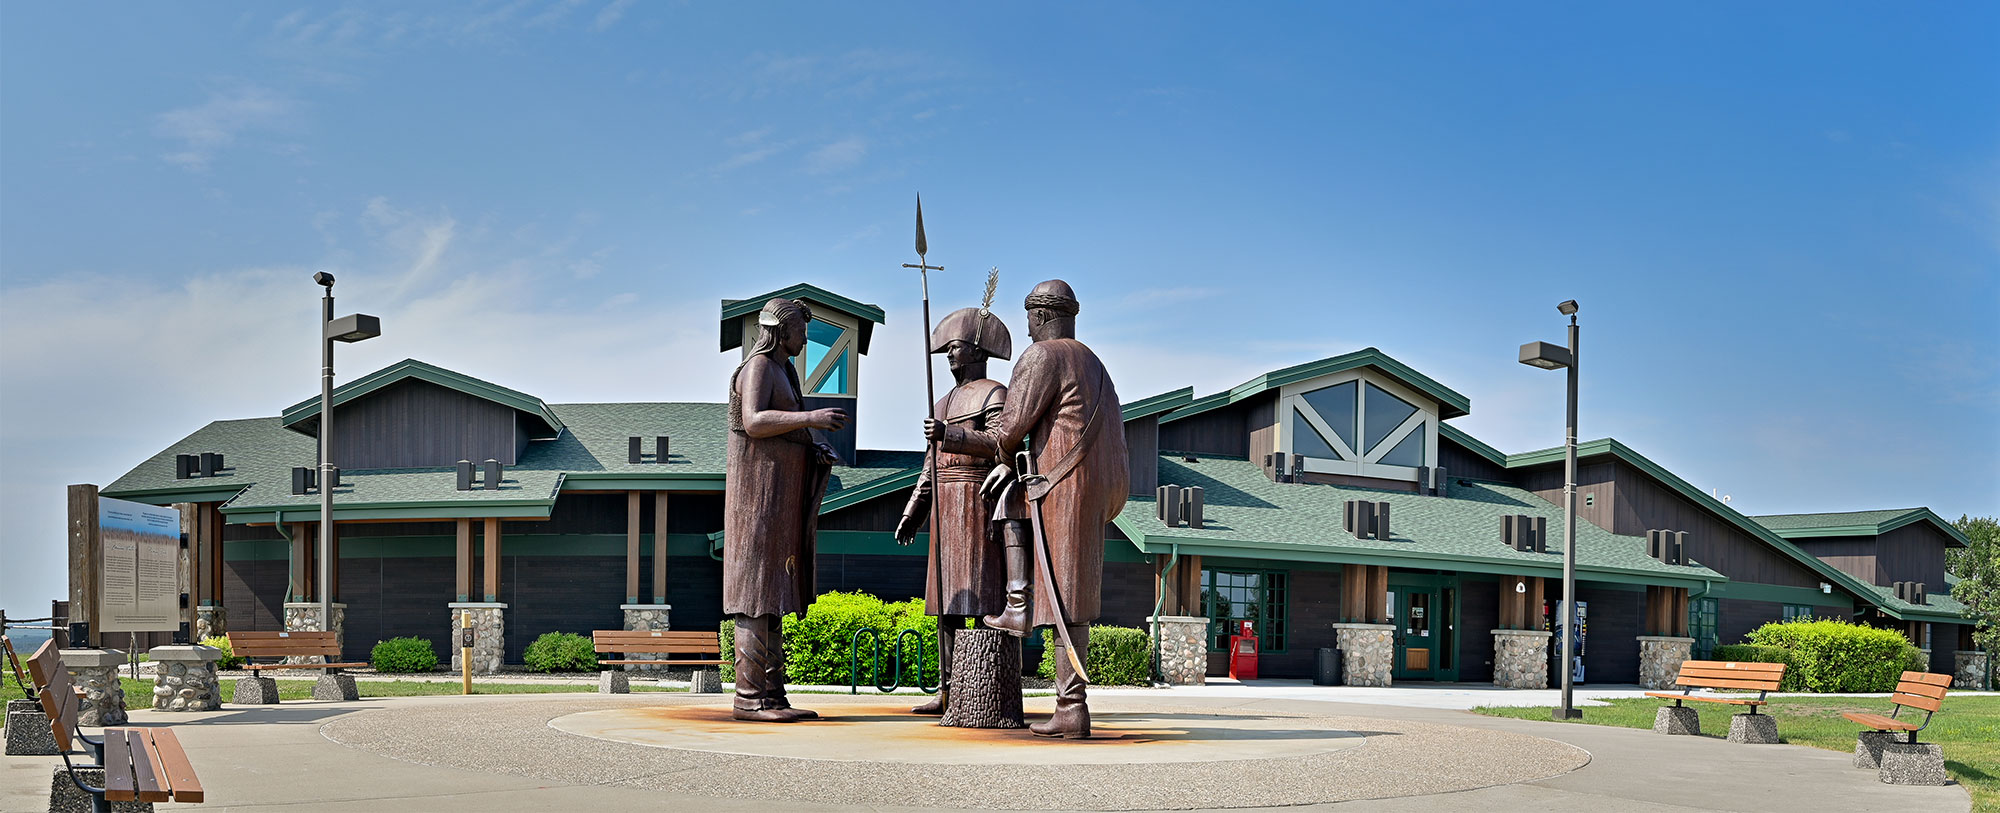 exterior view of a brown building with green trim and roof. Three statues stand in front of the building. They are of Lewis & Clark and a Native American 